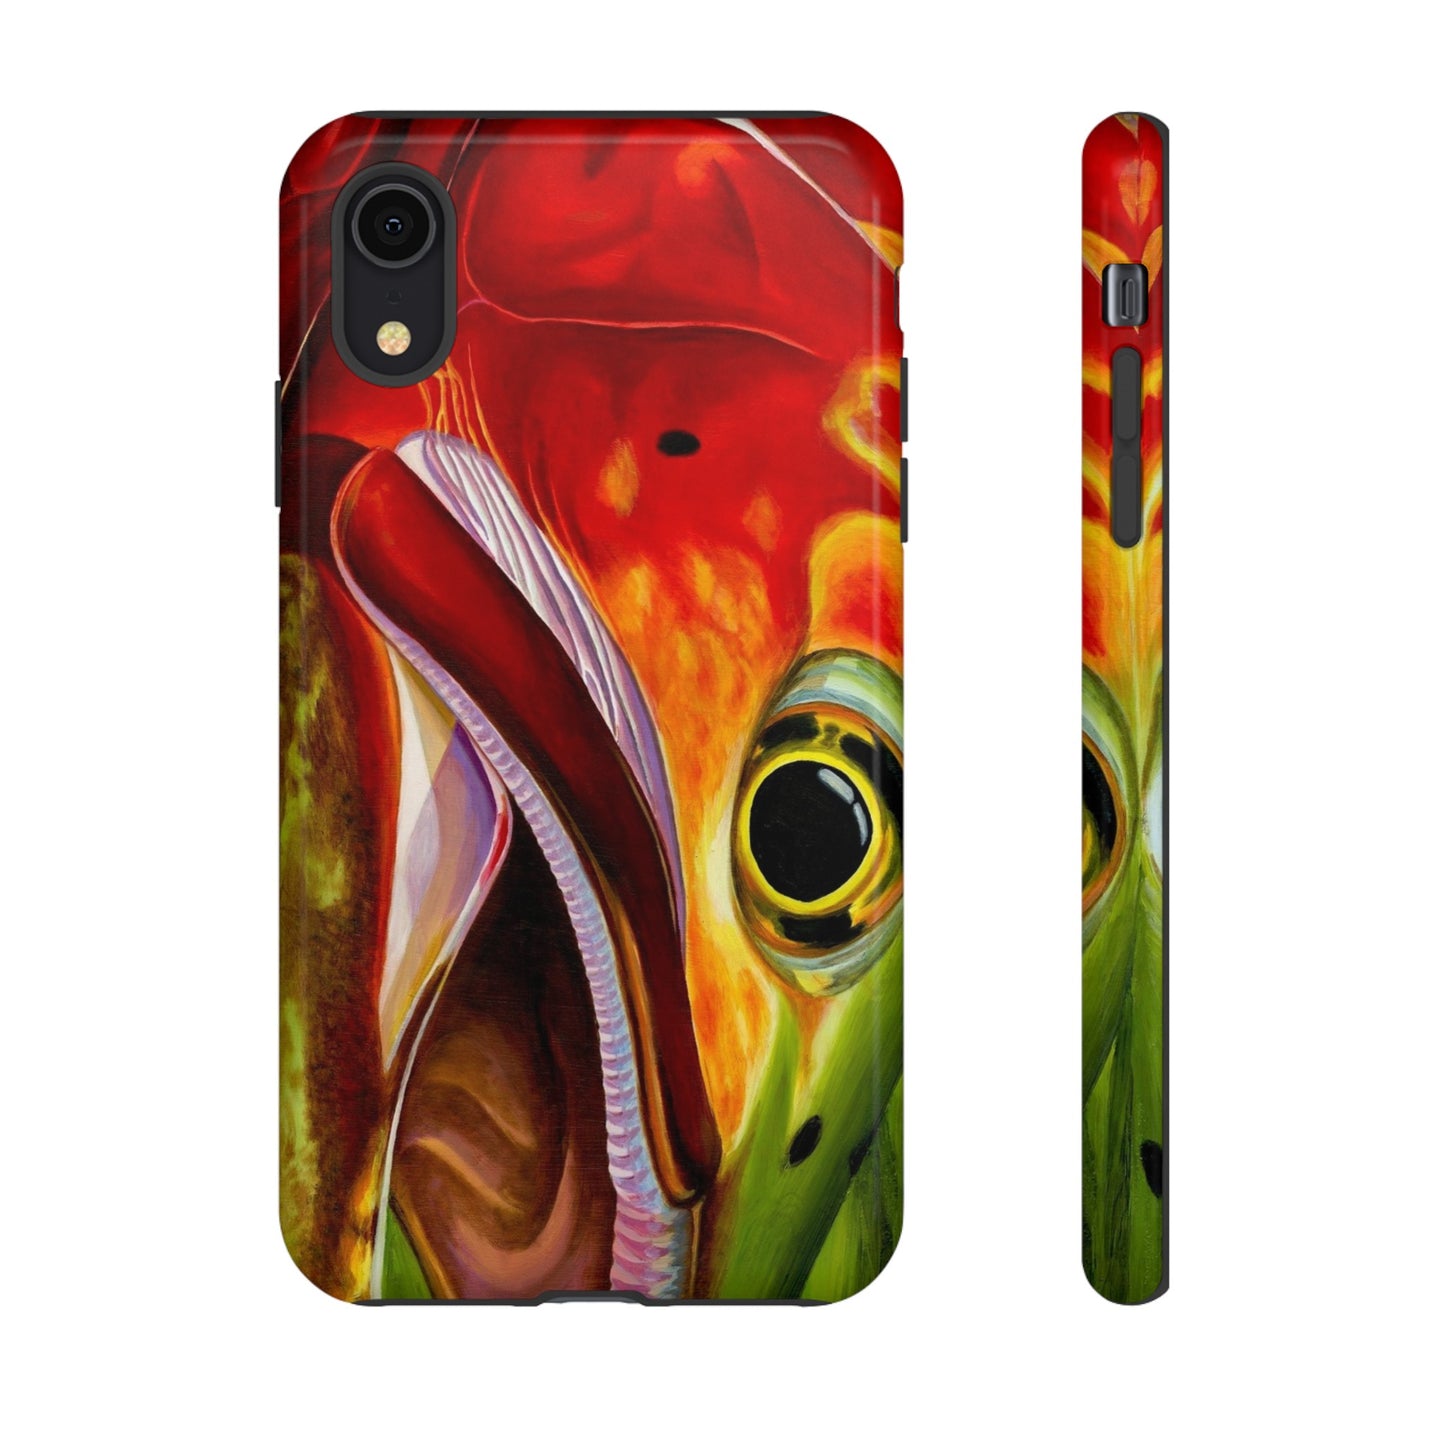 Fishing Phone Case, Trout IPhone Case, Samsung Galaxy Case, Google Pixel Case, Fishing Phone Case,  Gift for Fisherman